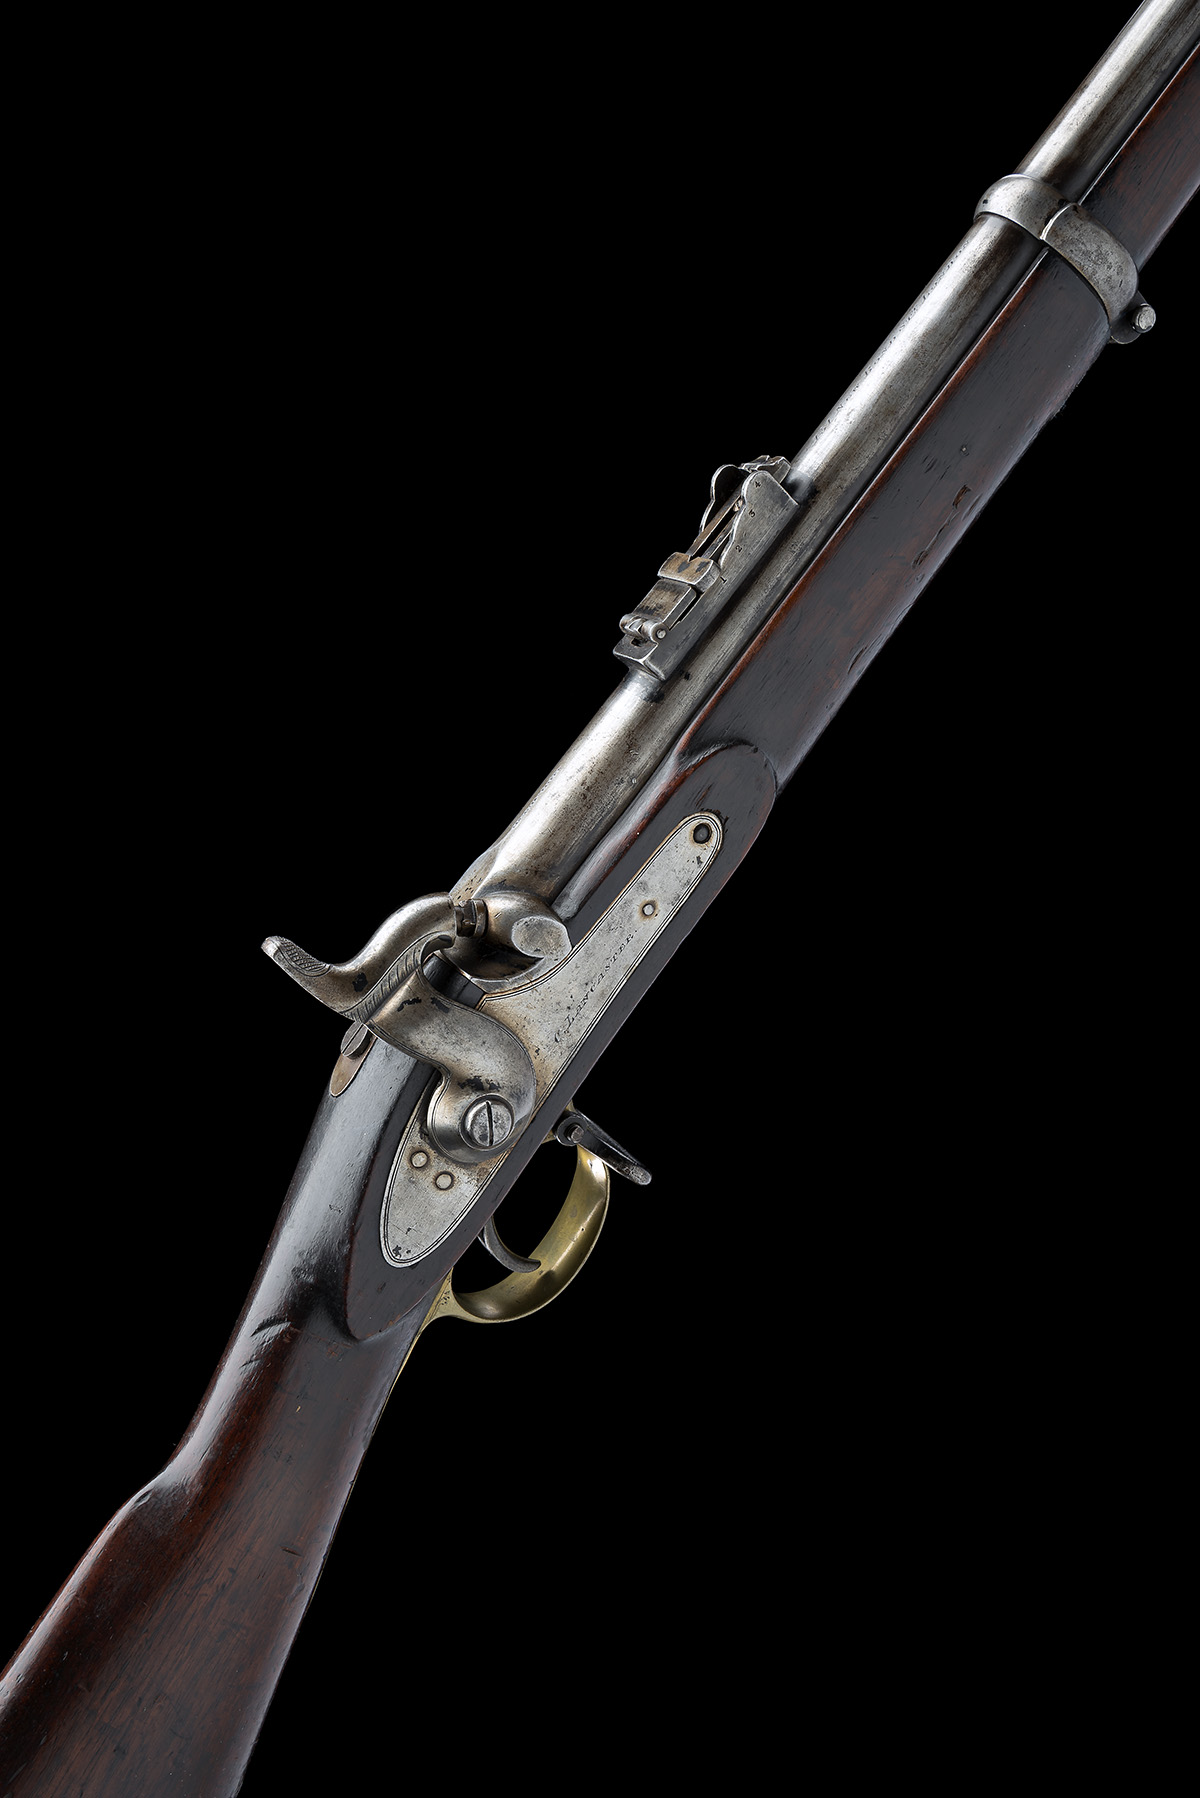 A EXCEPTIONALLY RARE .577 LANCASTER OVAL BORE 3-BAND GOVERNMENT TRIALS RIFLE , EX-ENFIELD PATTERN